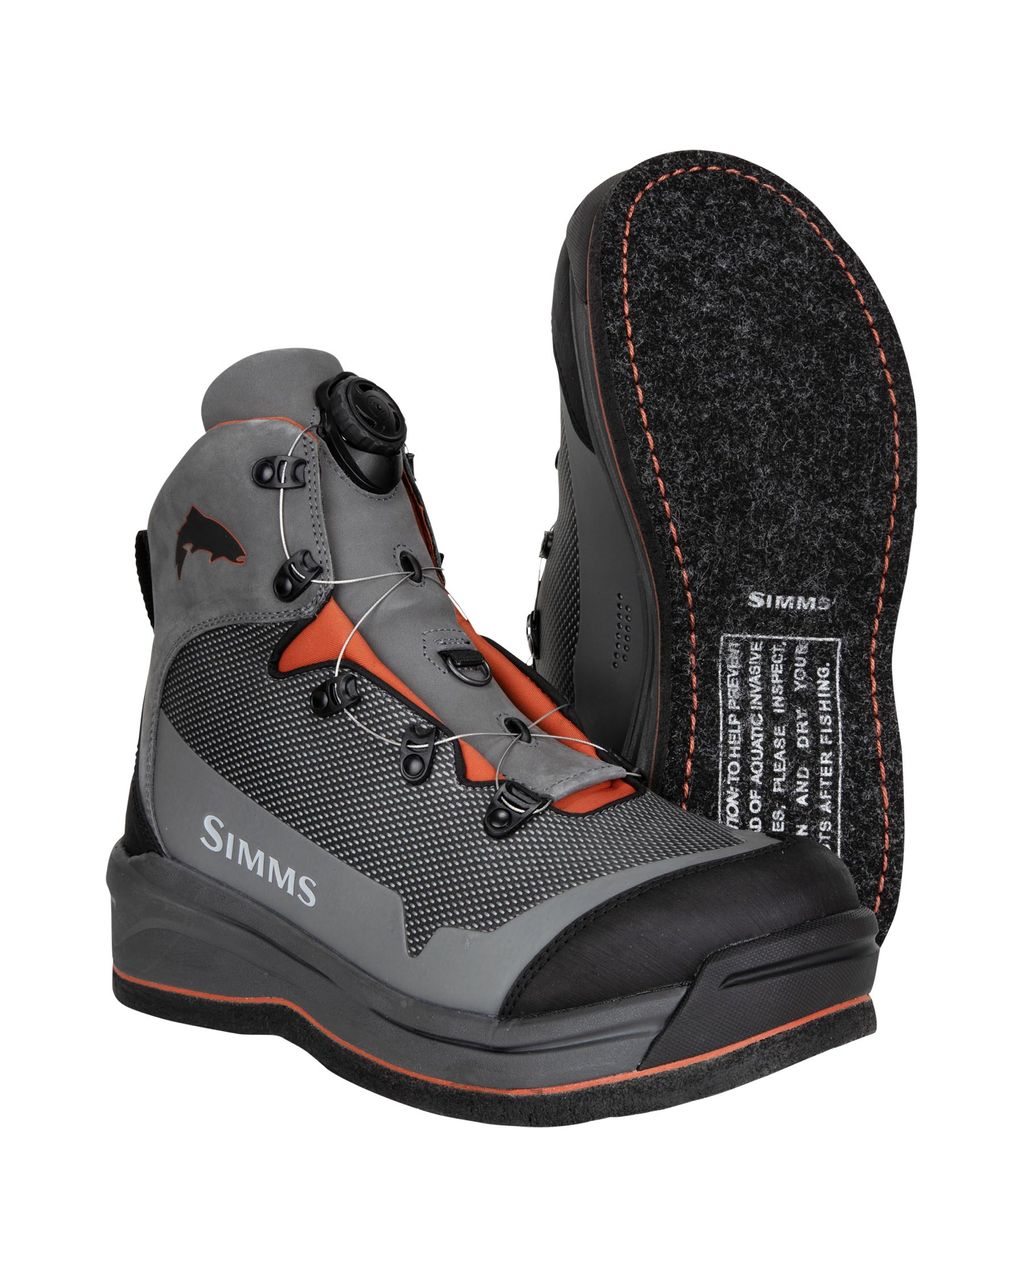 Simms M's Guide BOA Wading Boot - Felt - Size 8